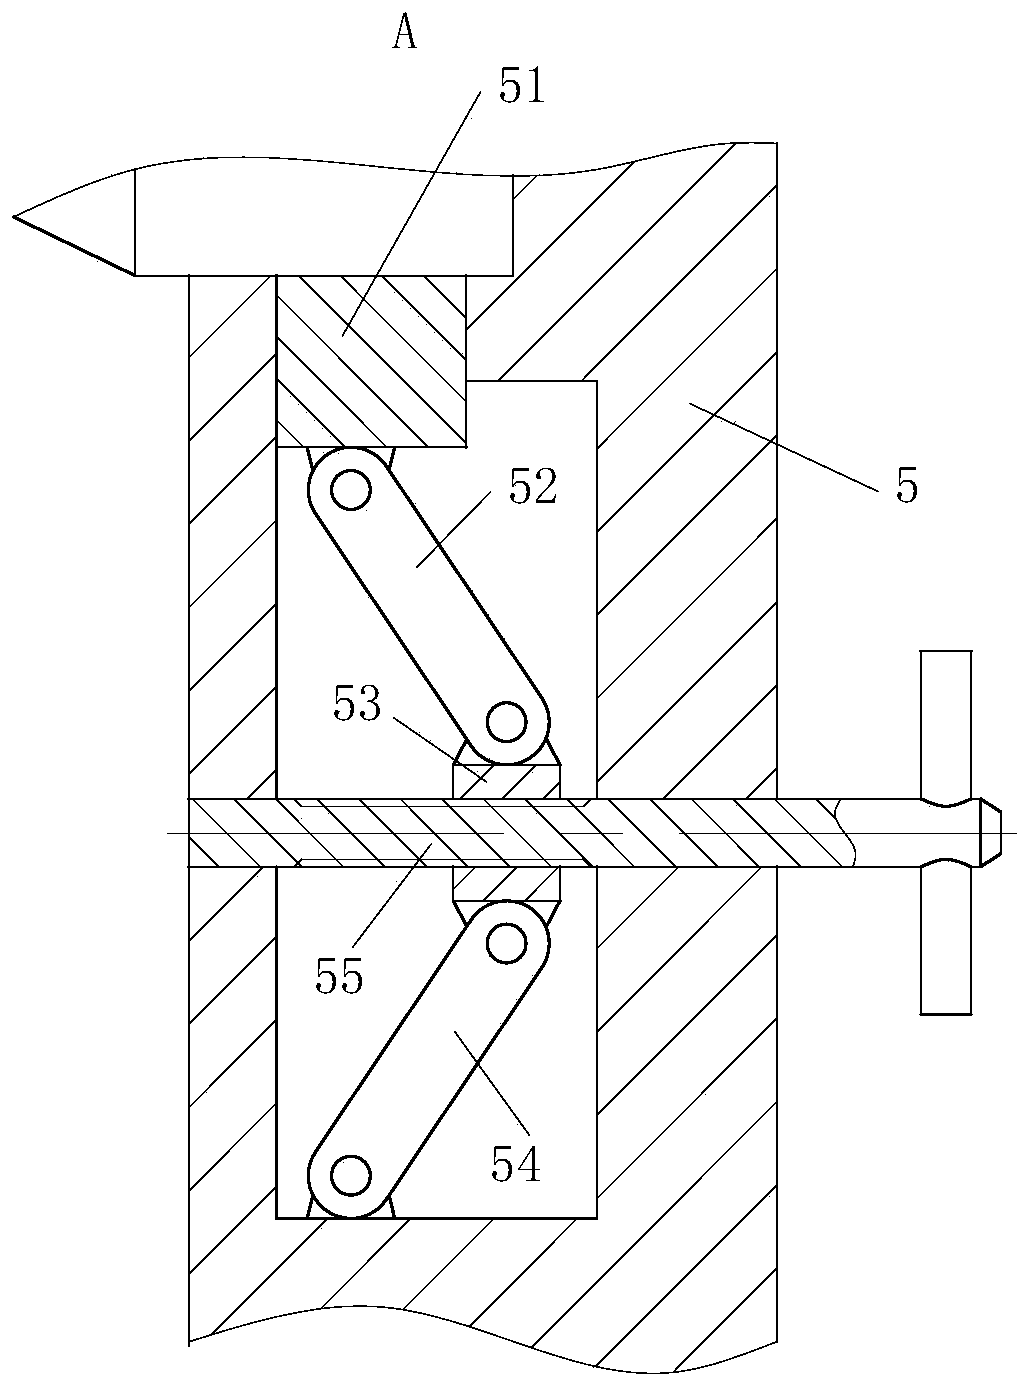 A guide device for longitudinal shearing of soft cold-rolled sheet